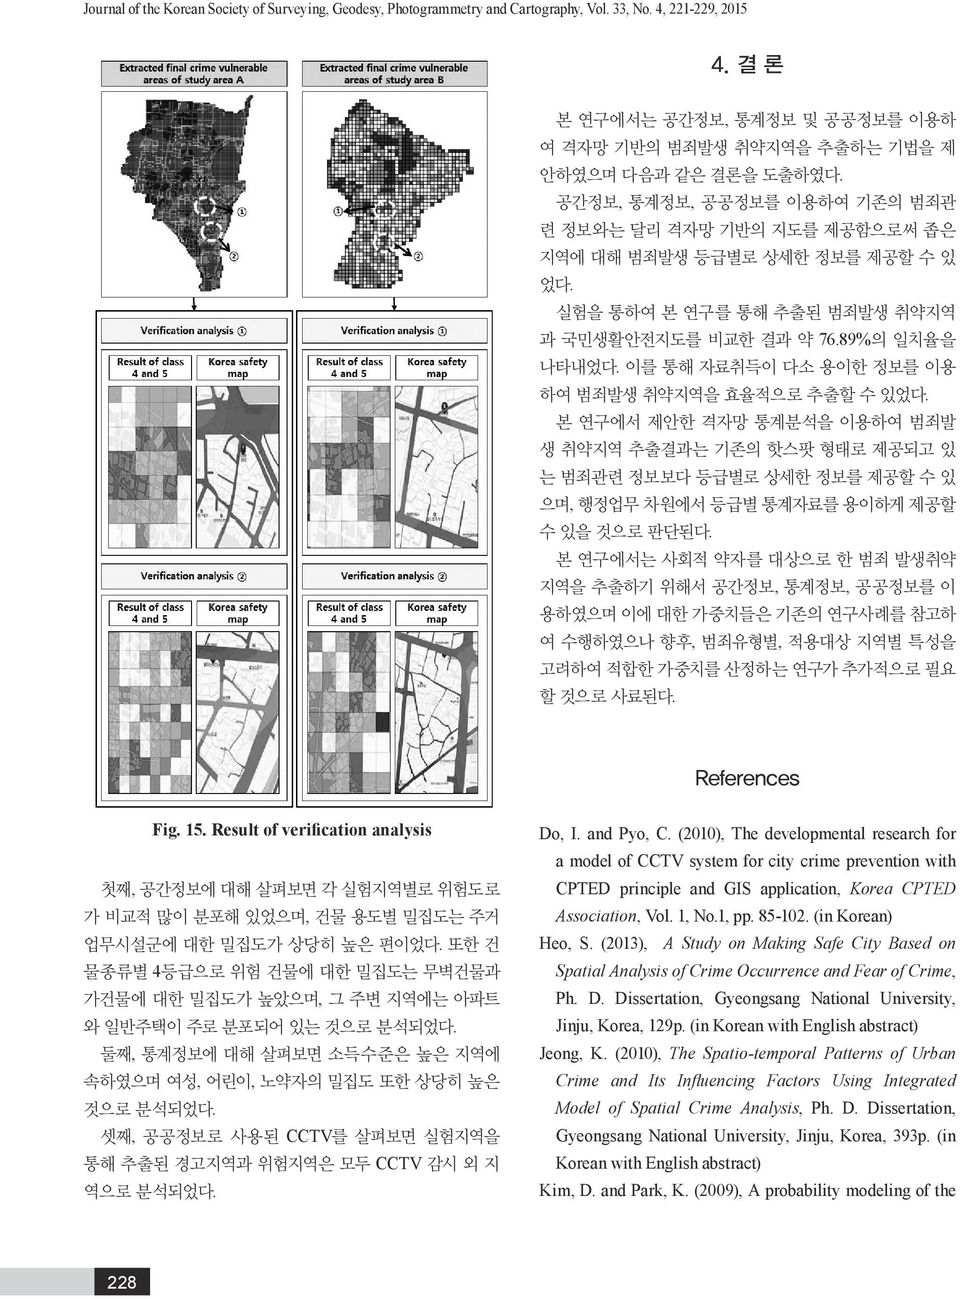 (in Korean) Heo, S. (2013), A Study on Making Safe City Based on Spatial Analysis of Crime Occurrence and Fear of Crime, Ph. D. Dissertation, Gyeongsang National University, Jinju, Korea, 129p.